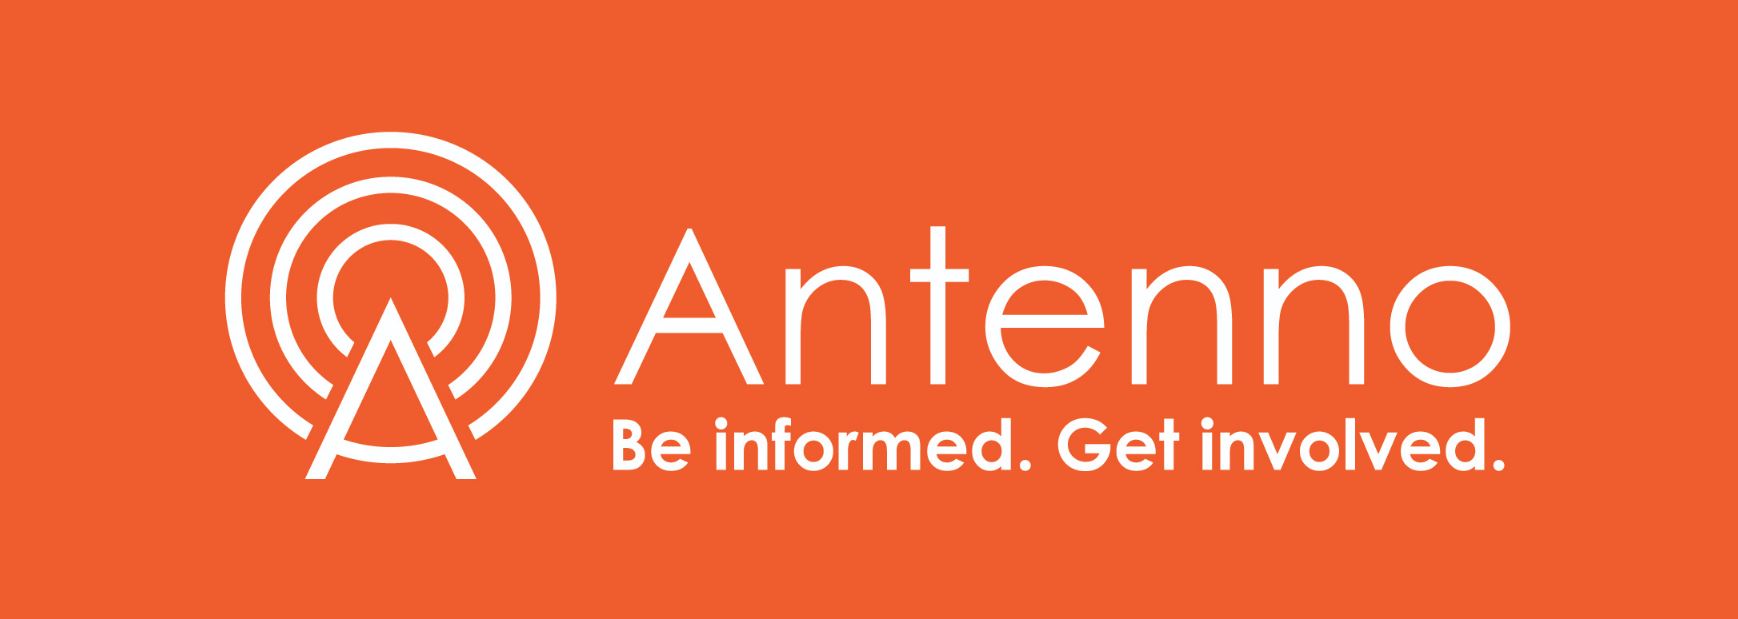 Antenno usage is on the rise